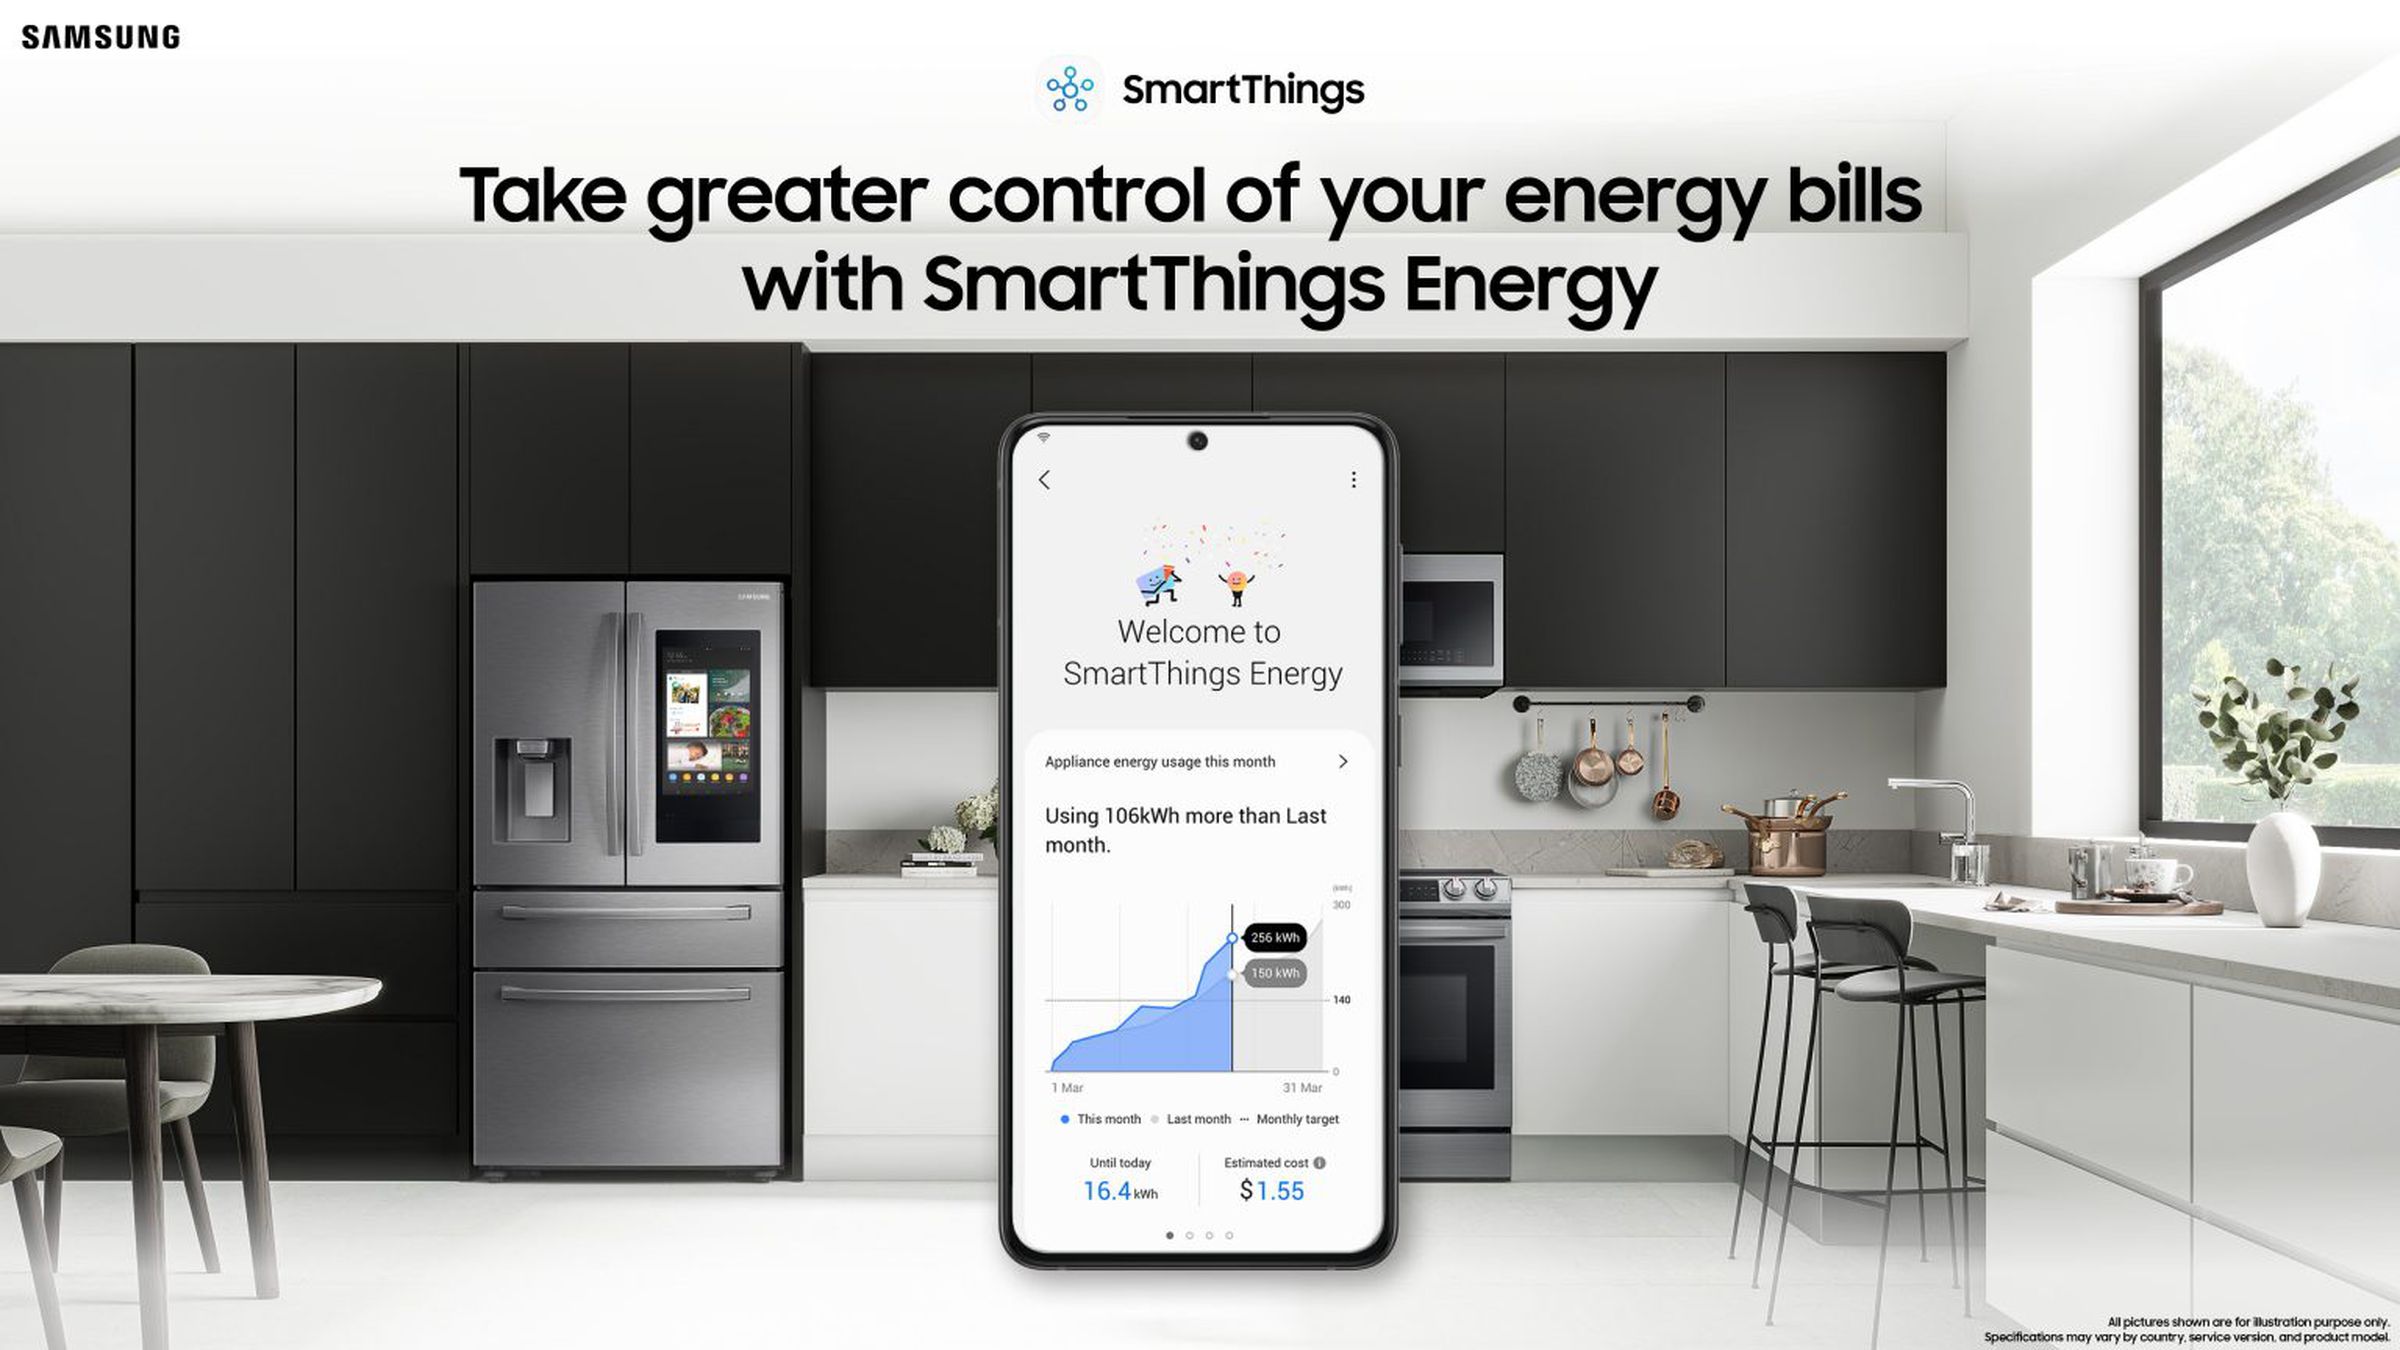 Samsung’s SmartThings Energy platform is one of the most robust options you can use to track energy usage in your home, especially if you have Samsung Appliances.